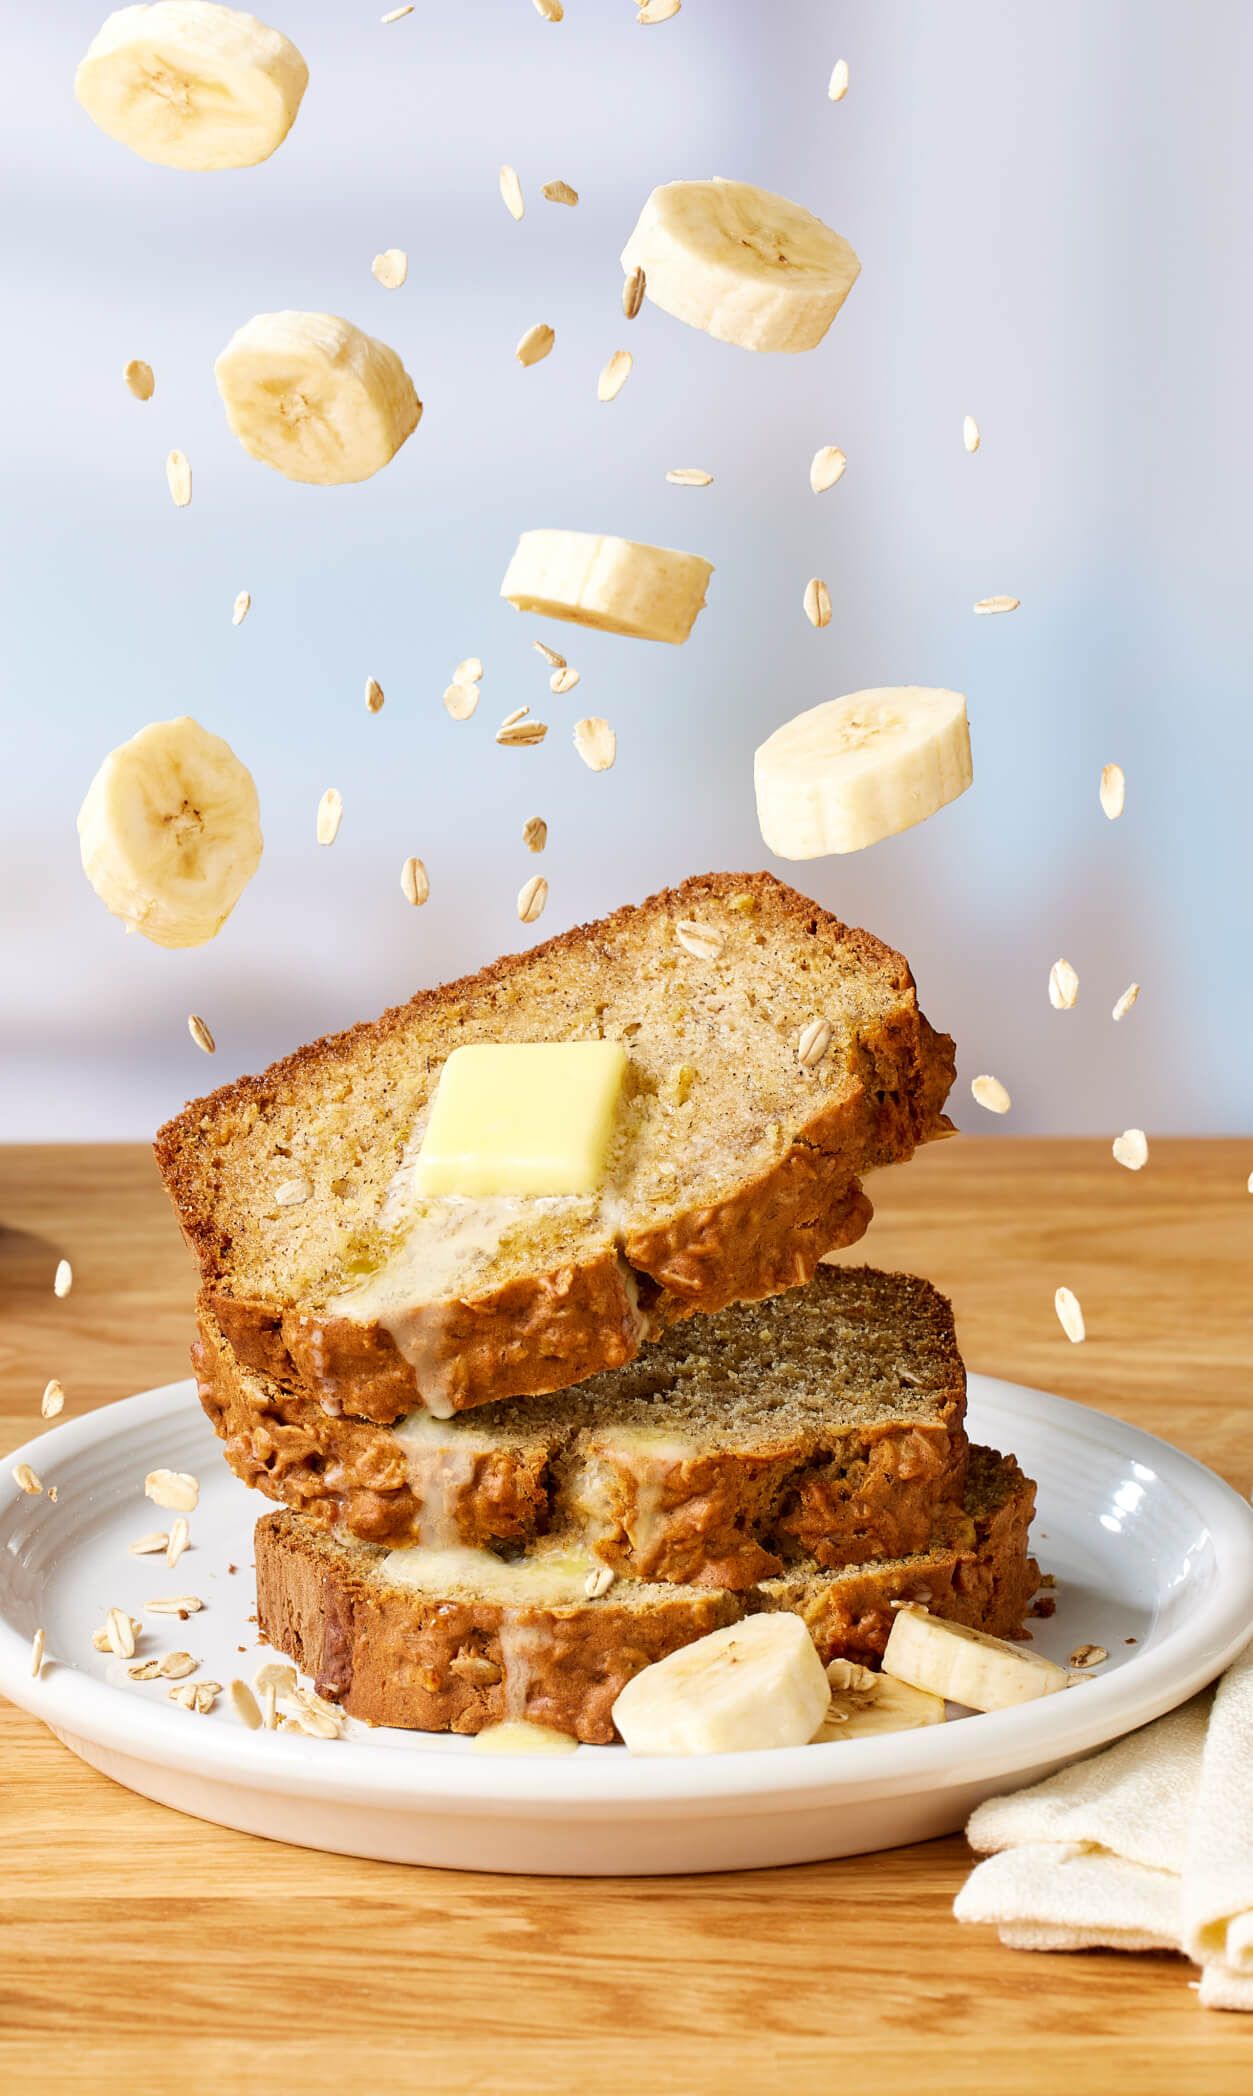 Sliced banana bread with butter, bananas, and oats.